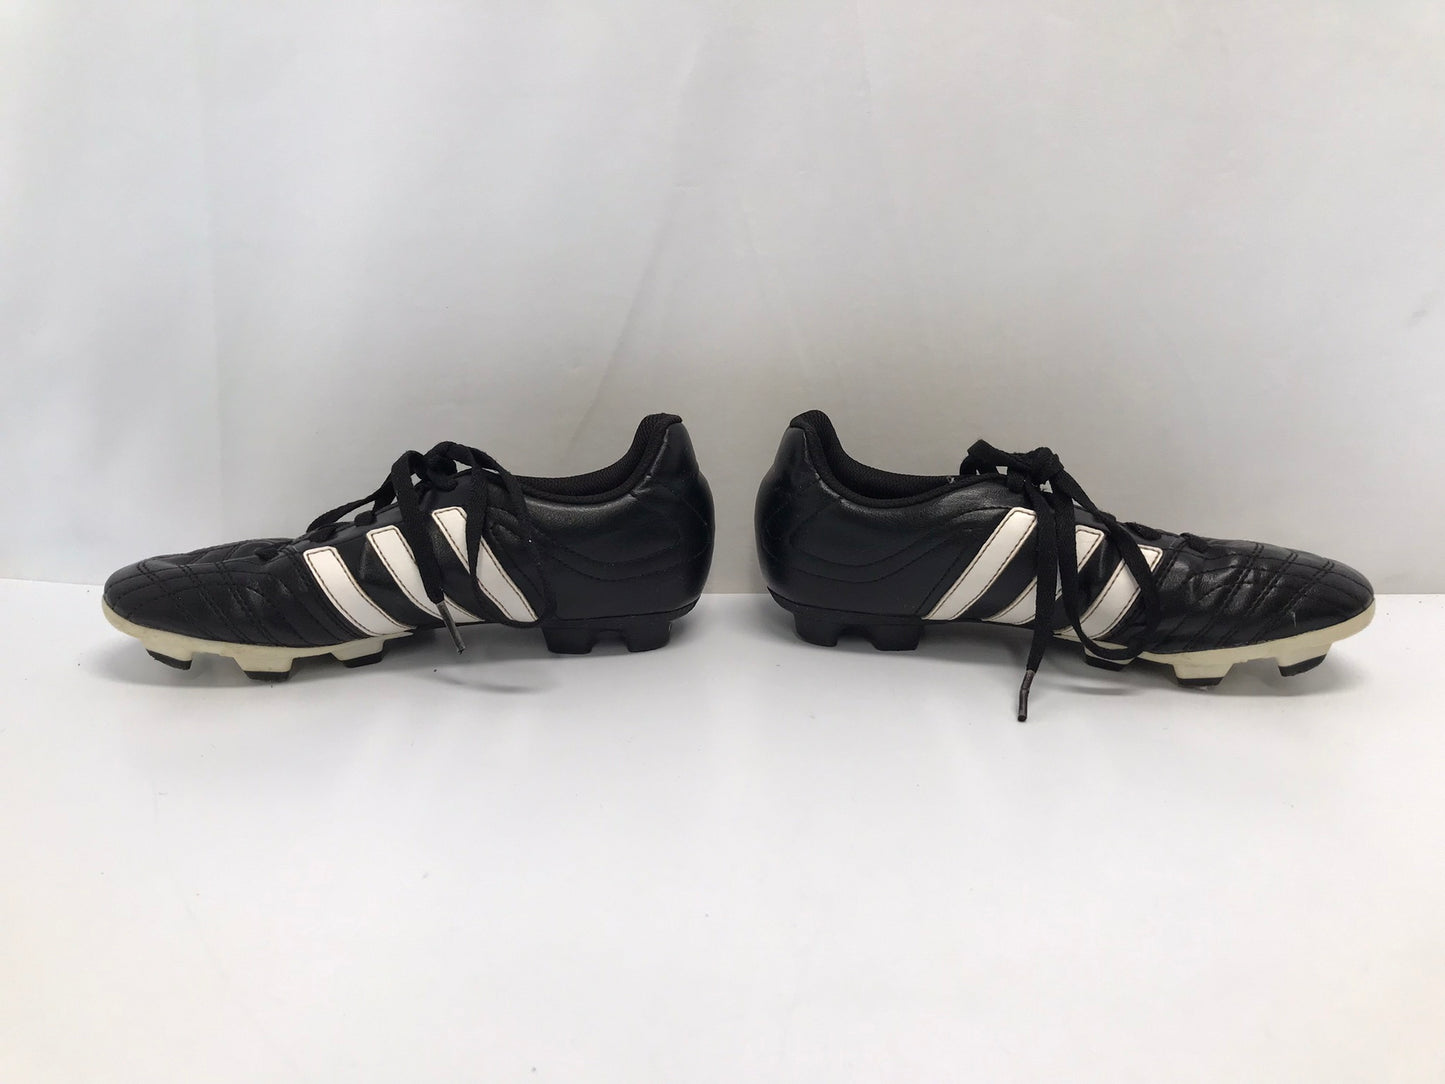 Soccer Shoes Cleats Child Size 3 Adidas Black White